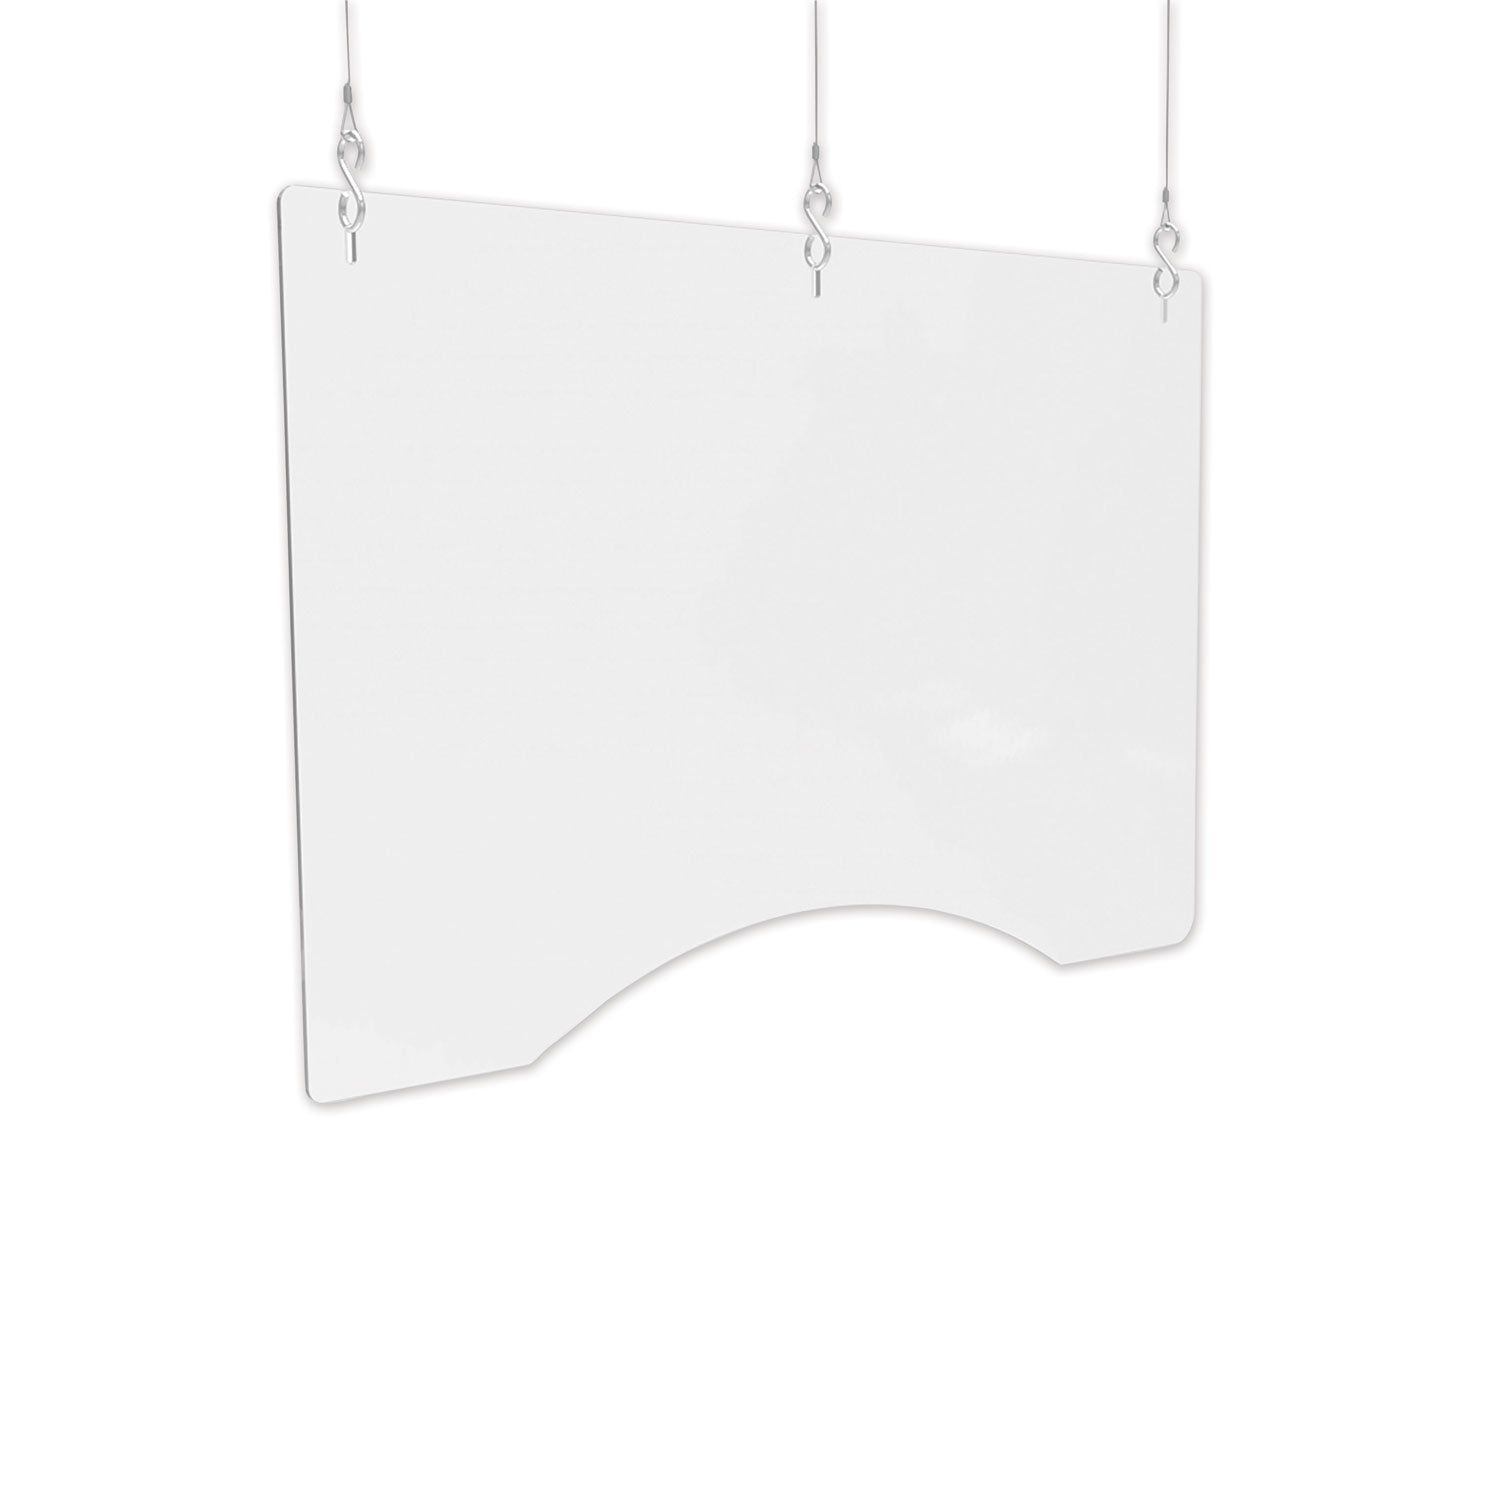 hanging-barrier-36-x-24-polycarbonate-clear-2-carton_defpbchpc3624 - 1